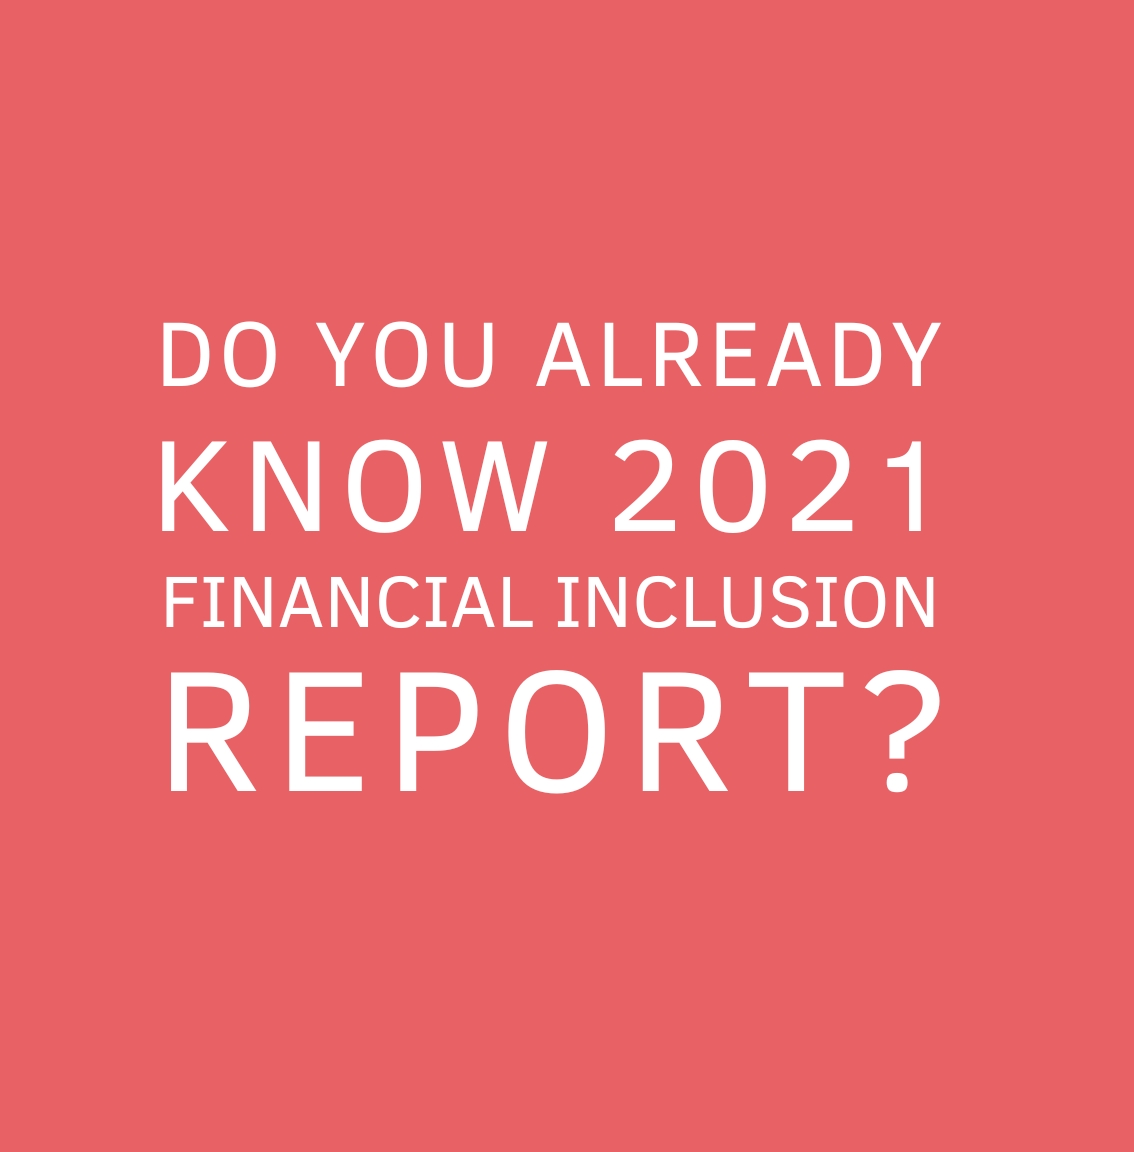 Do you already know 2021 financial inclusion report?